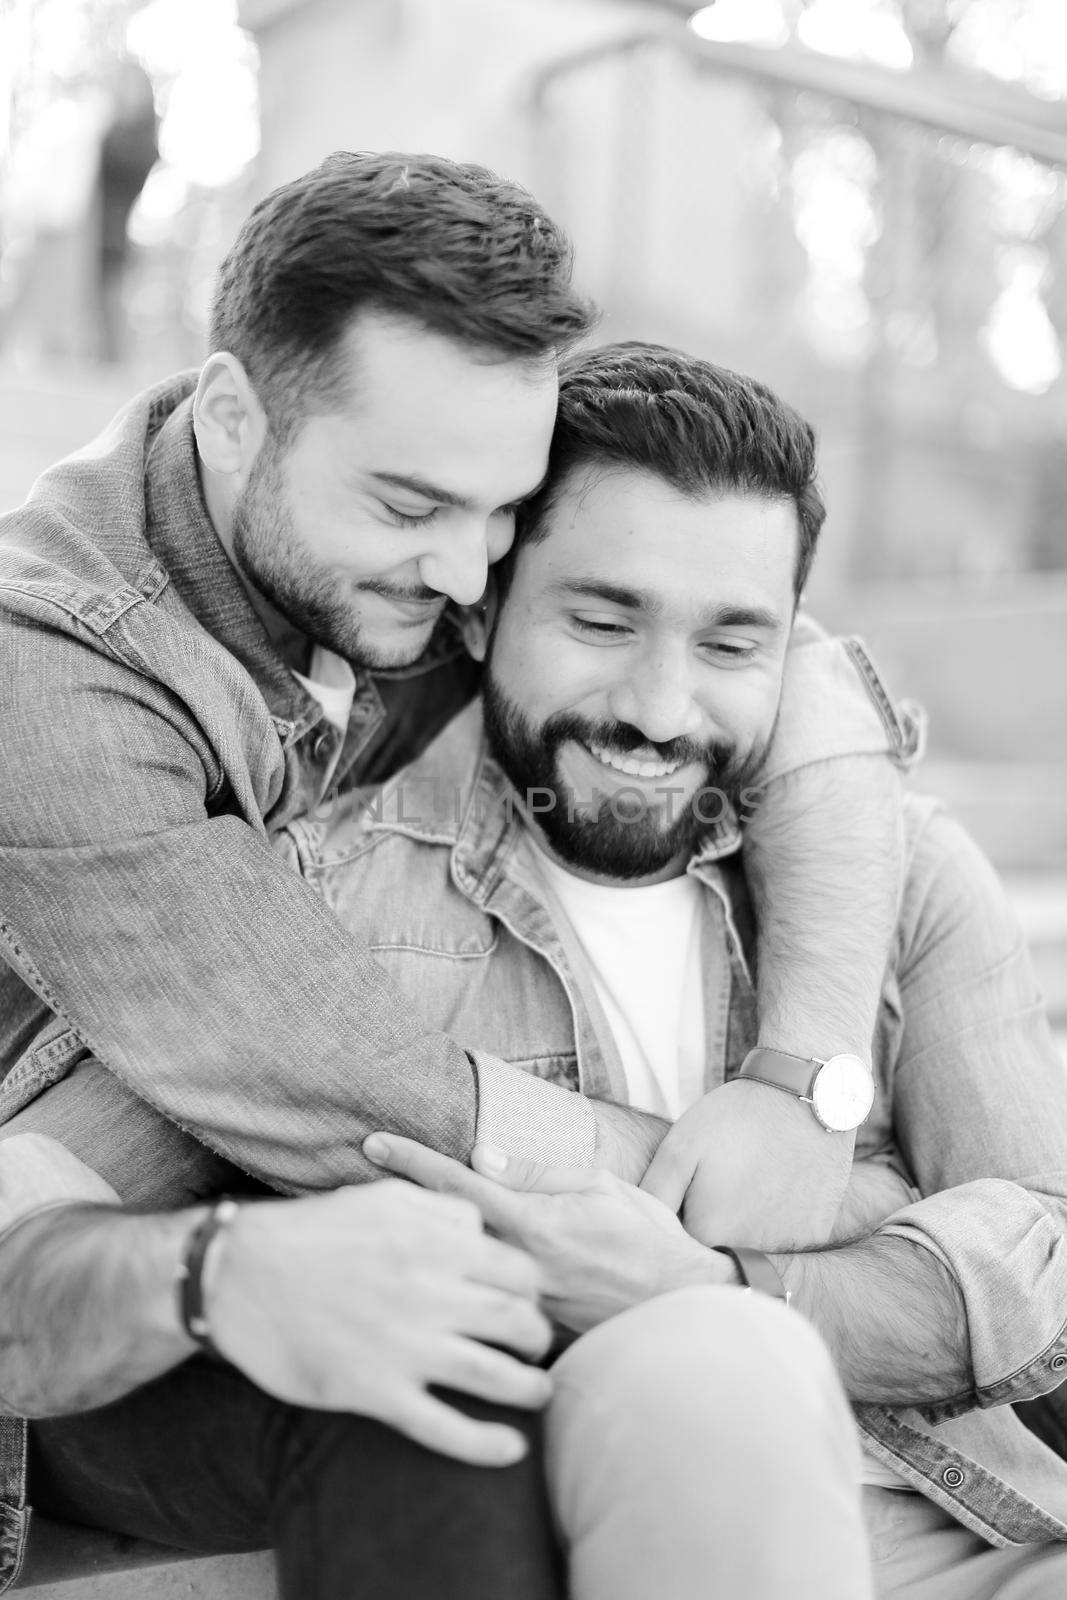 Black and white photo of caucasian young gays hugging and wearing jeans shirts. Concept of same sex couple and relationship.